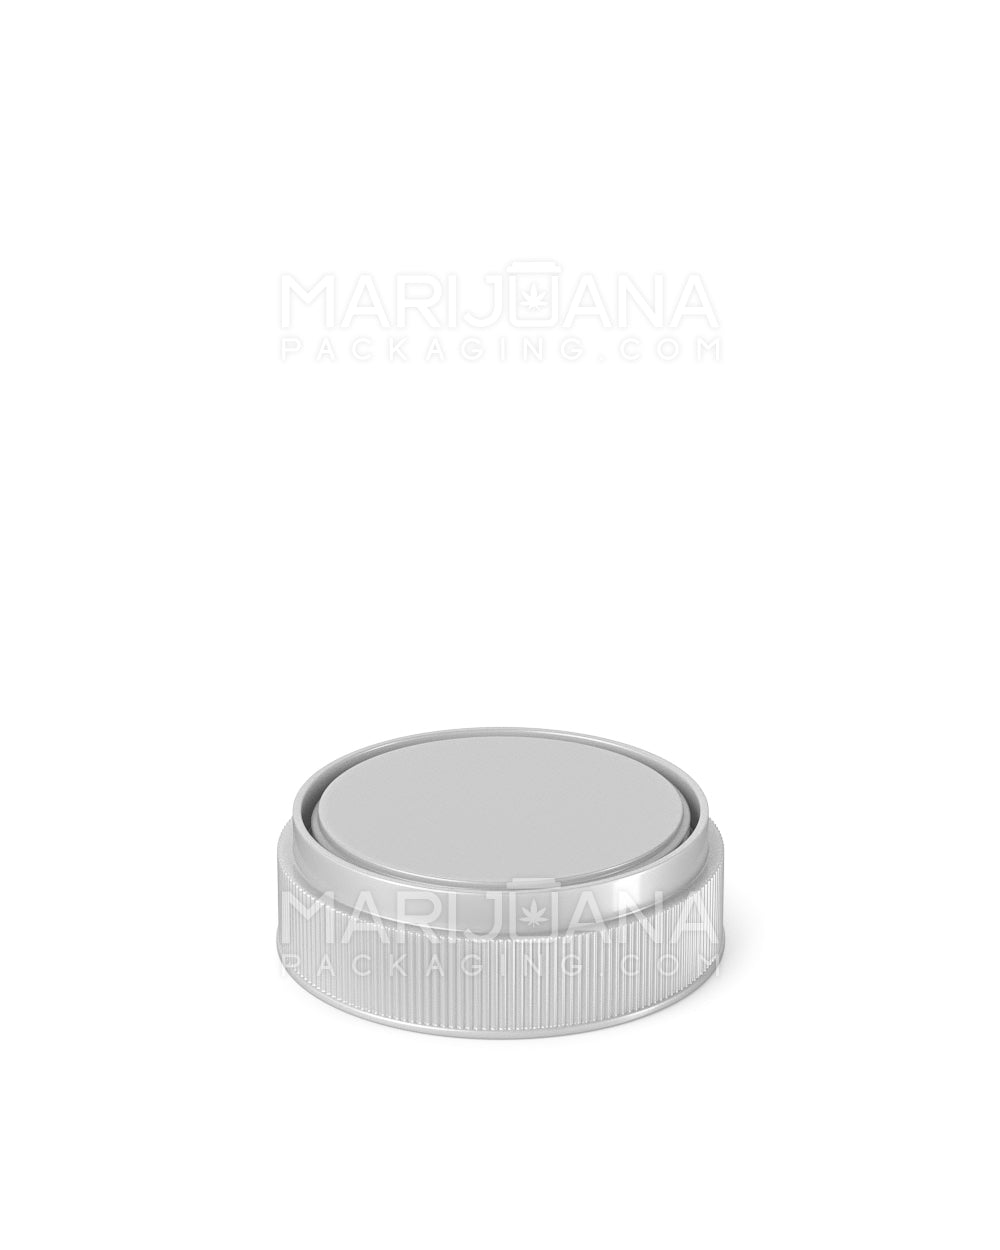 Child Resistant | Opaque Silver Blank Reversible Cap Vials | 40dr - 10g - 150 Count - 13